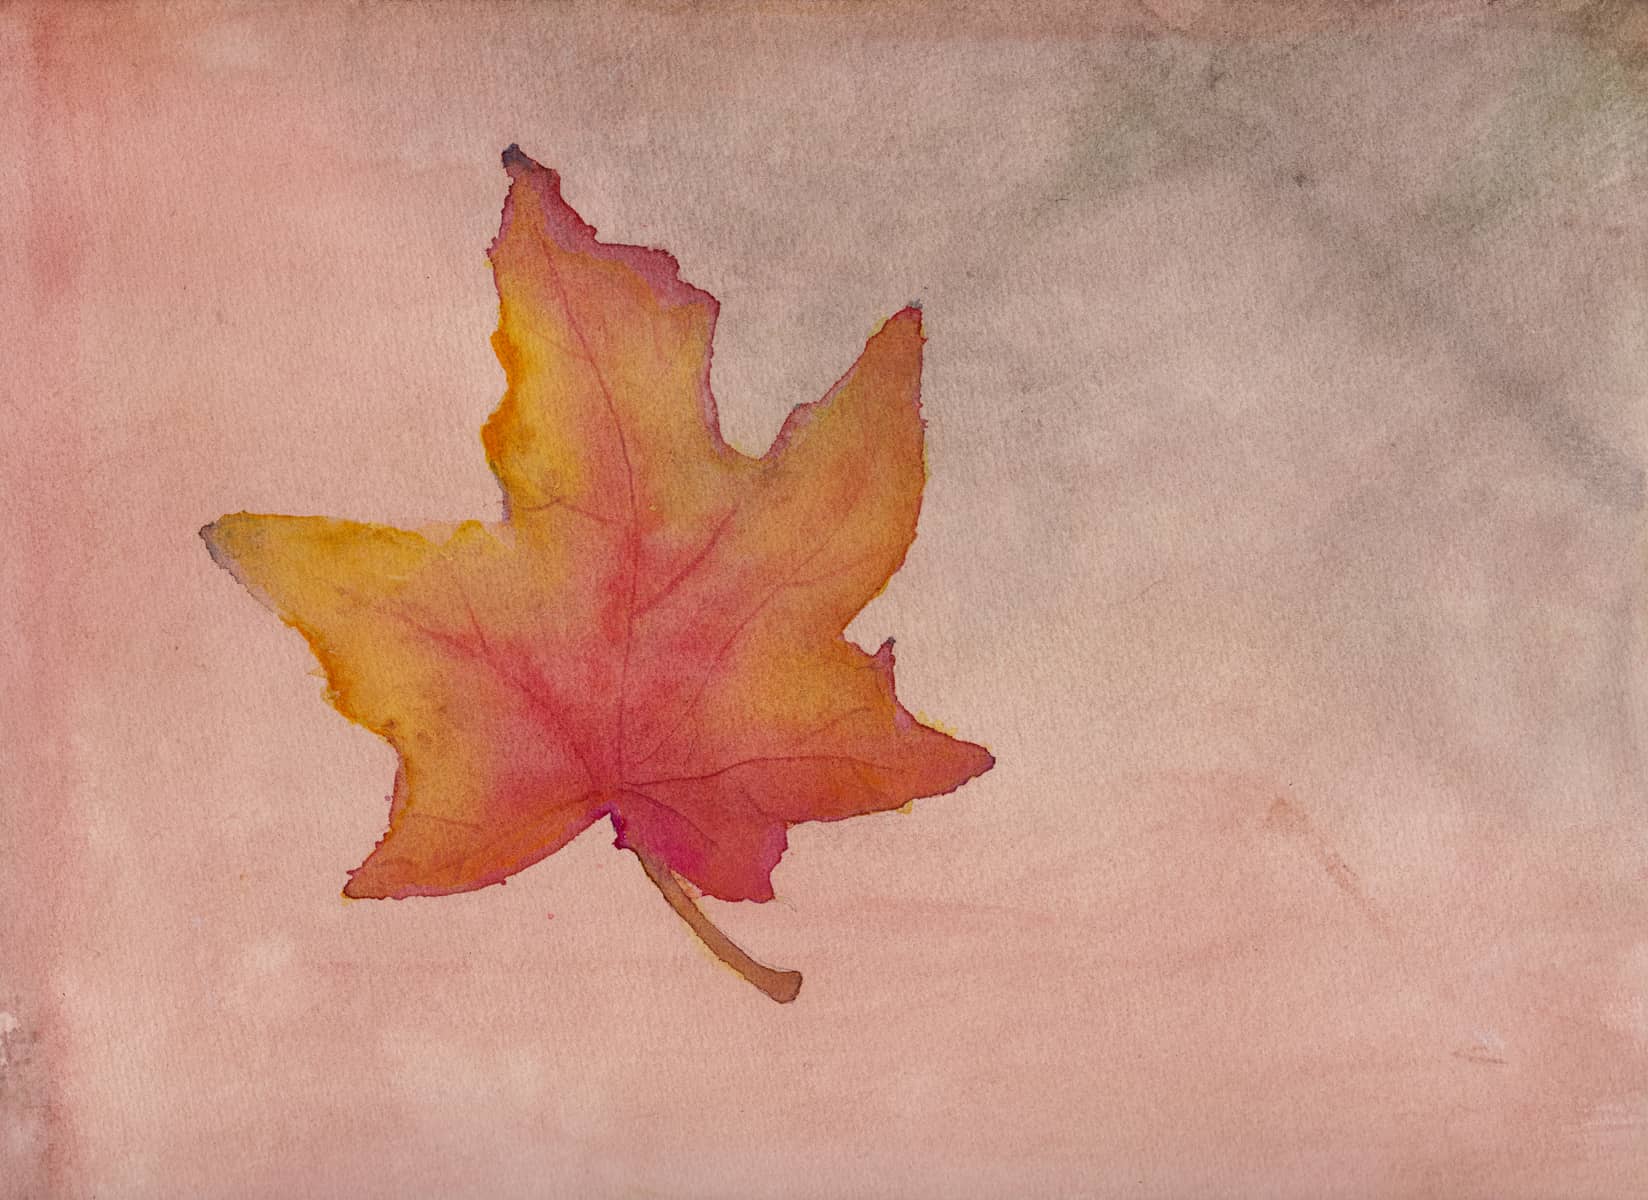 Maple Leaf in Autumn - Paintings and drawings of all kinds of plantlife. Primarily inspired by flora from Scandinavia, medicinal herbs, and the plants in my own garden